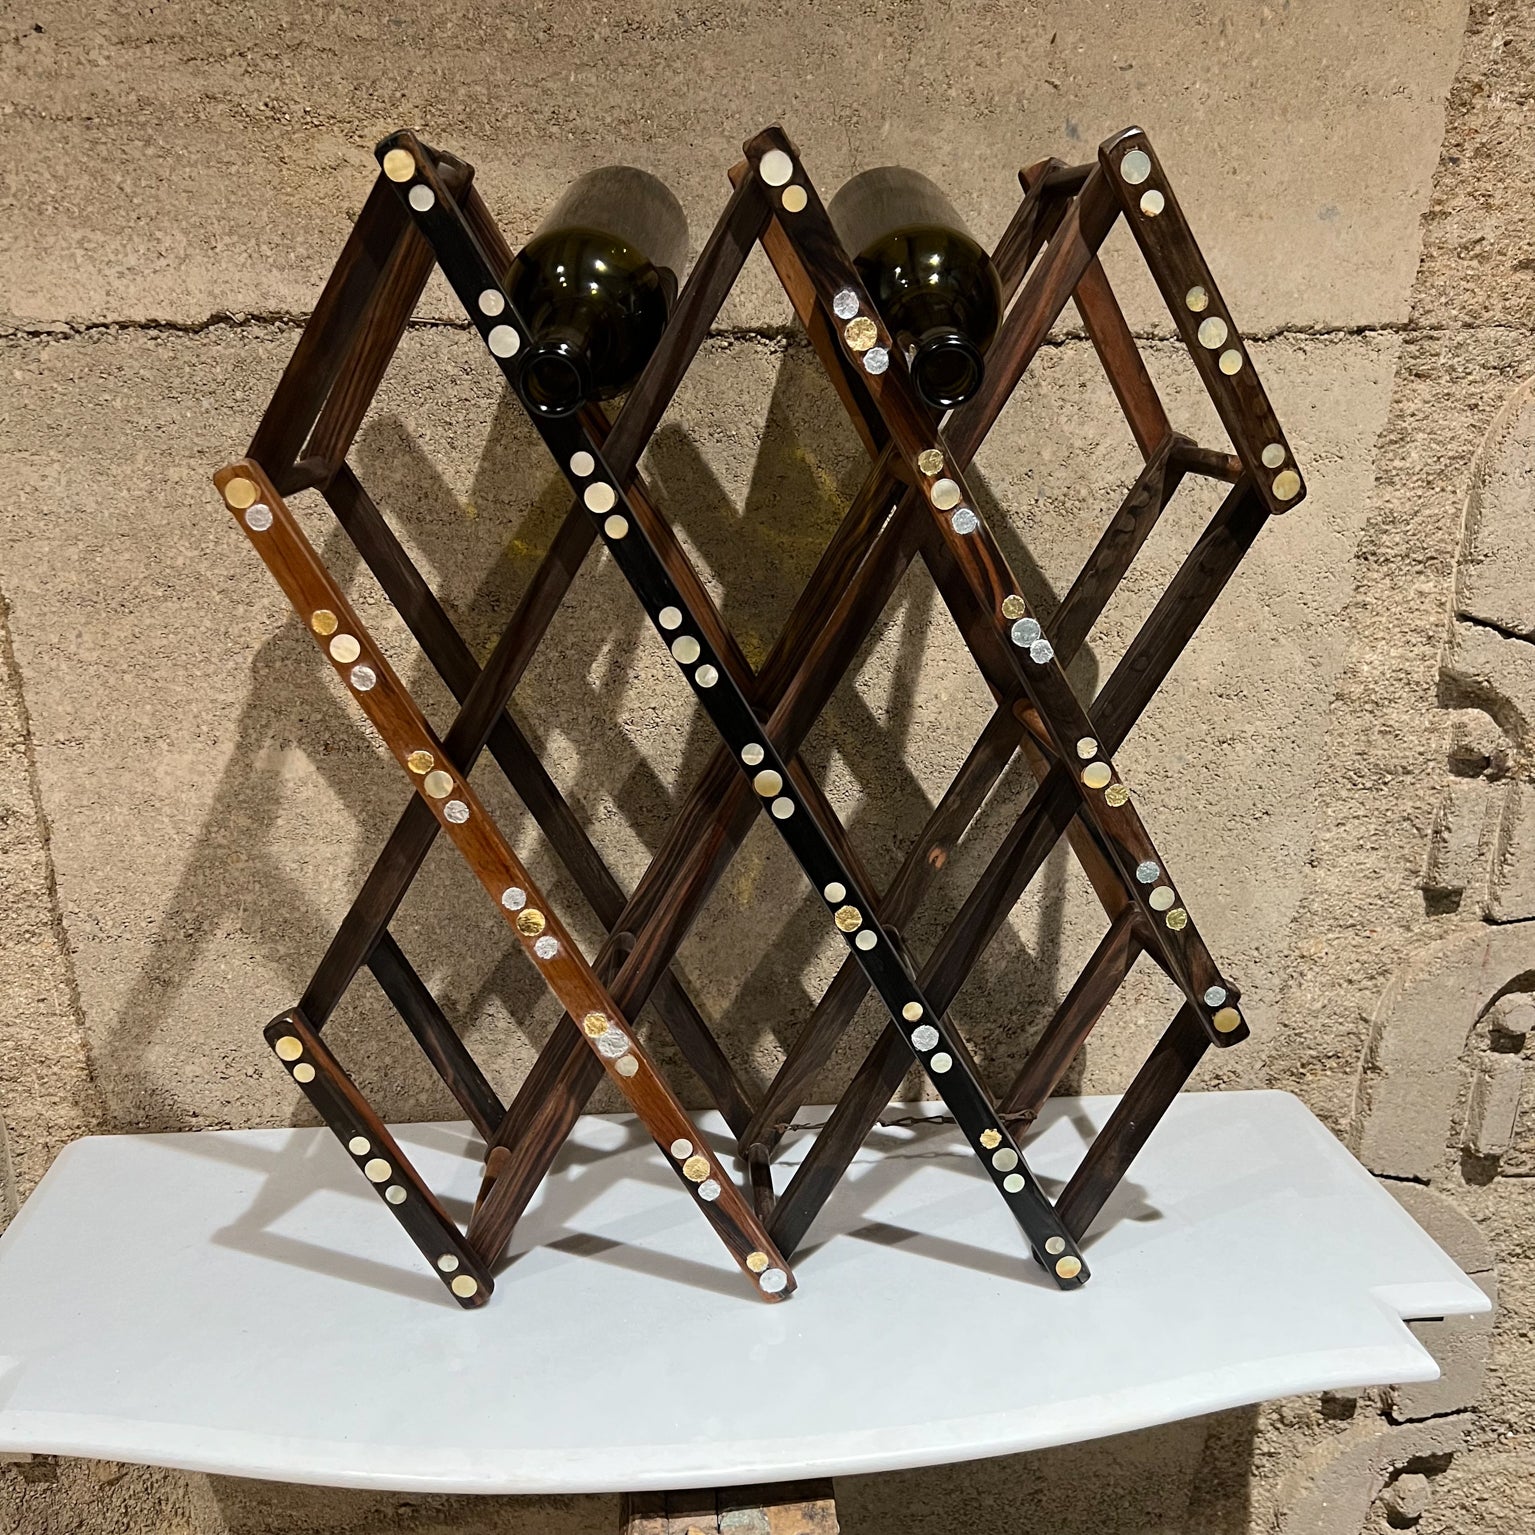 1970s MCM Foldable ten bottle wine rack bottle holder in rosewood and abalone shell
Measures closed 3 x 25 x 6.5 and open 18.5 W x 22.5 x 6.5 D
Preowned original unrestored vintage condition.
See images provided please.